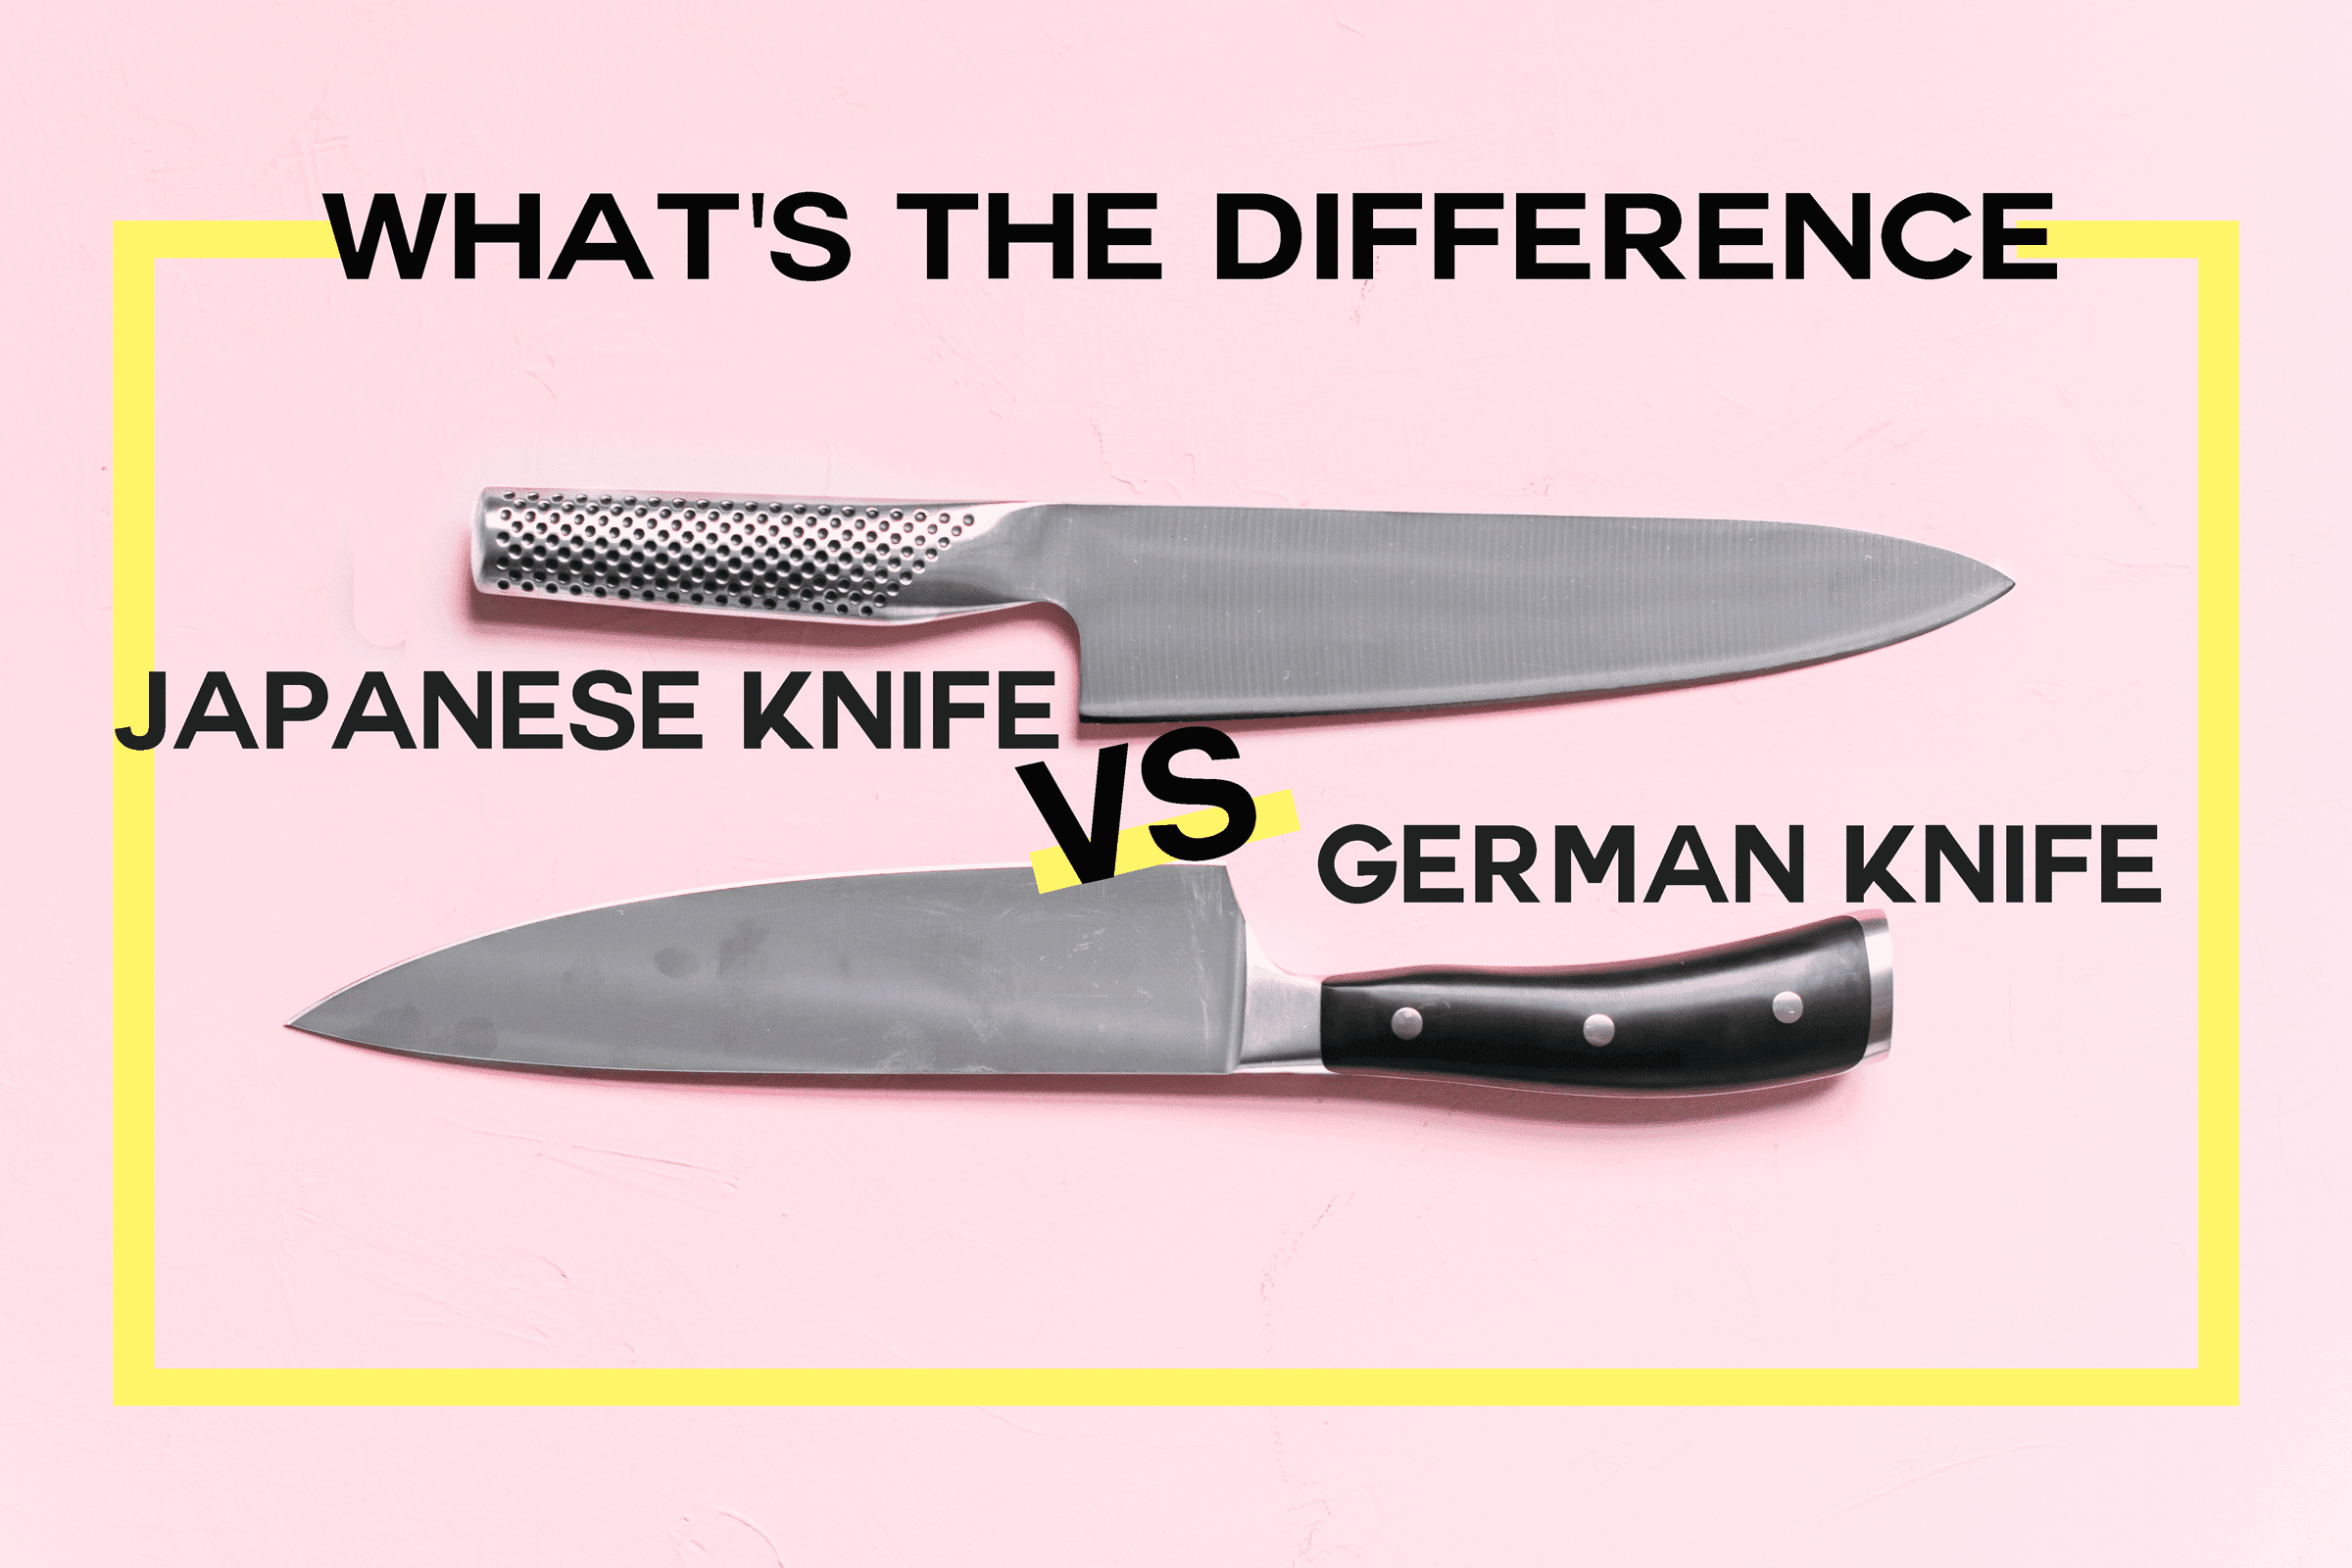 European kitchen knives from Japan and China